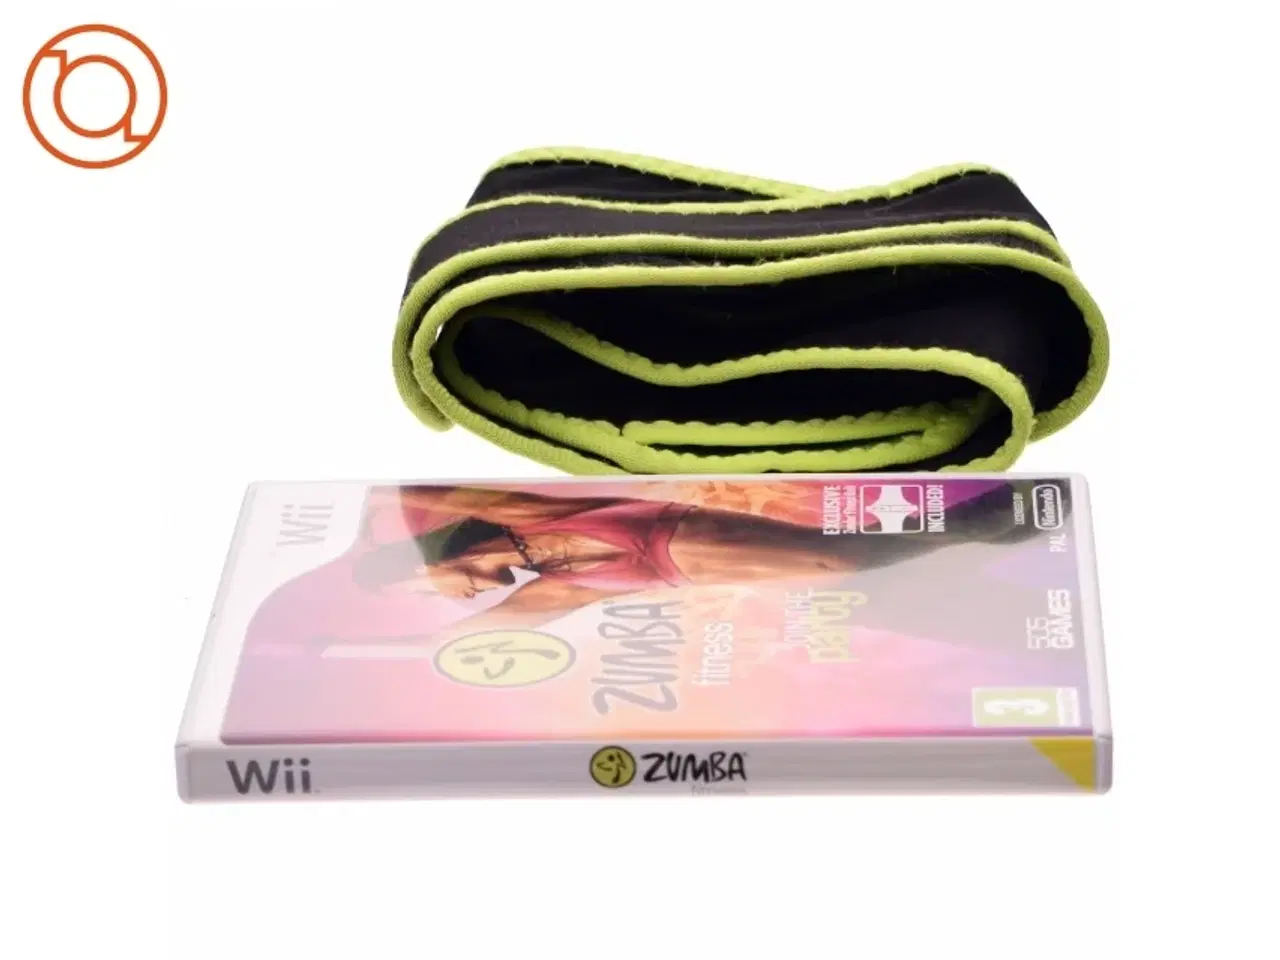 Billede 2 - ZUMBA fitness party WII fra Wii